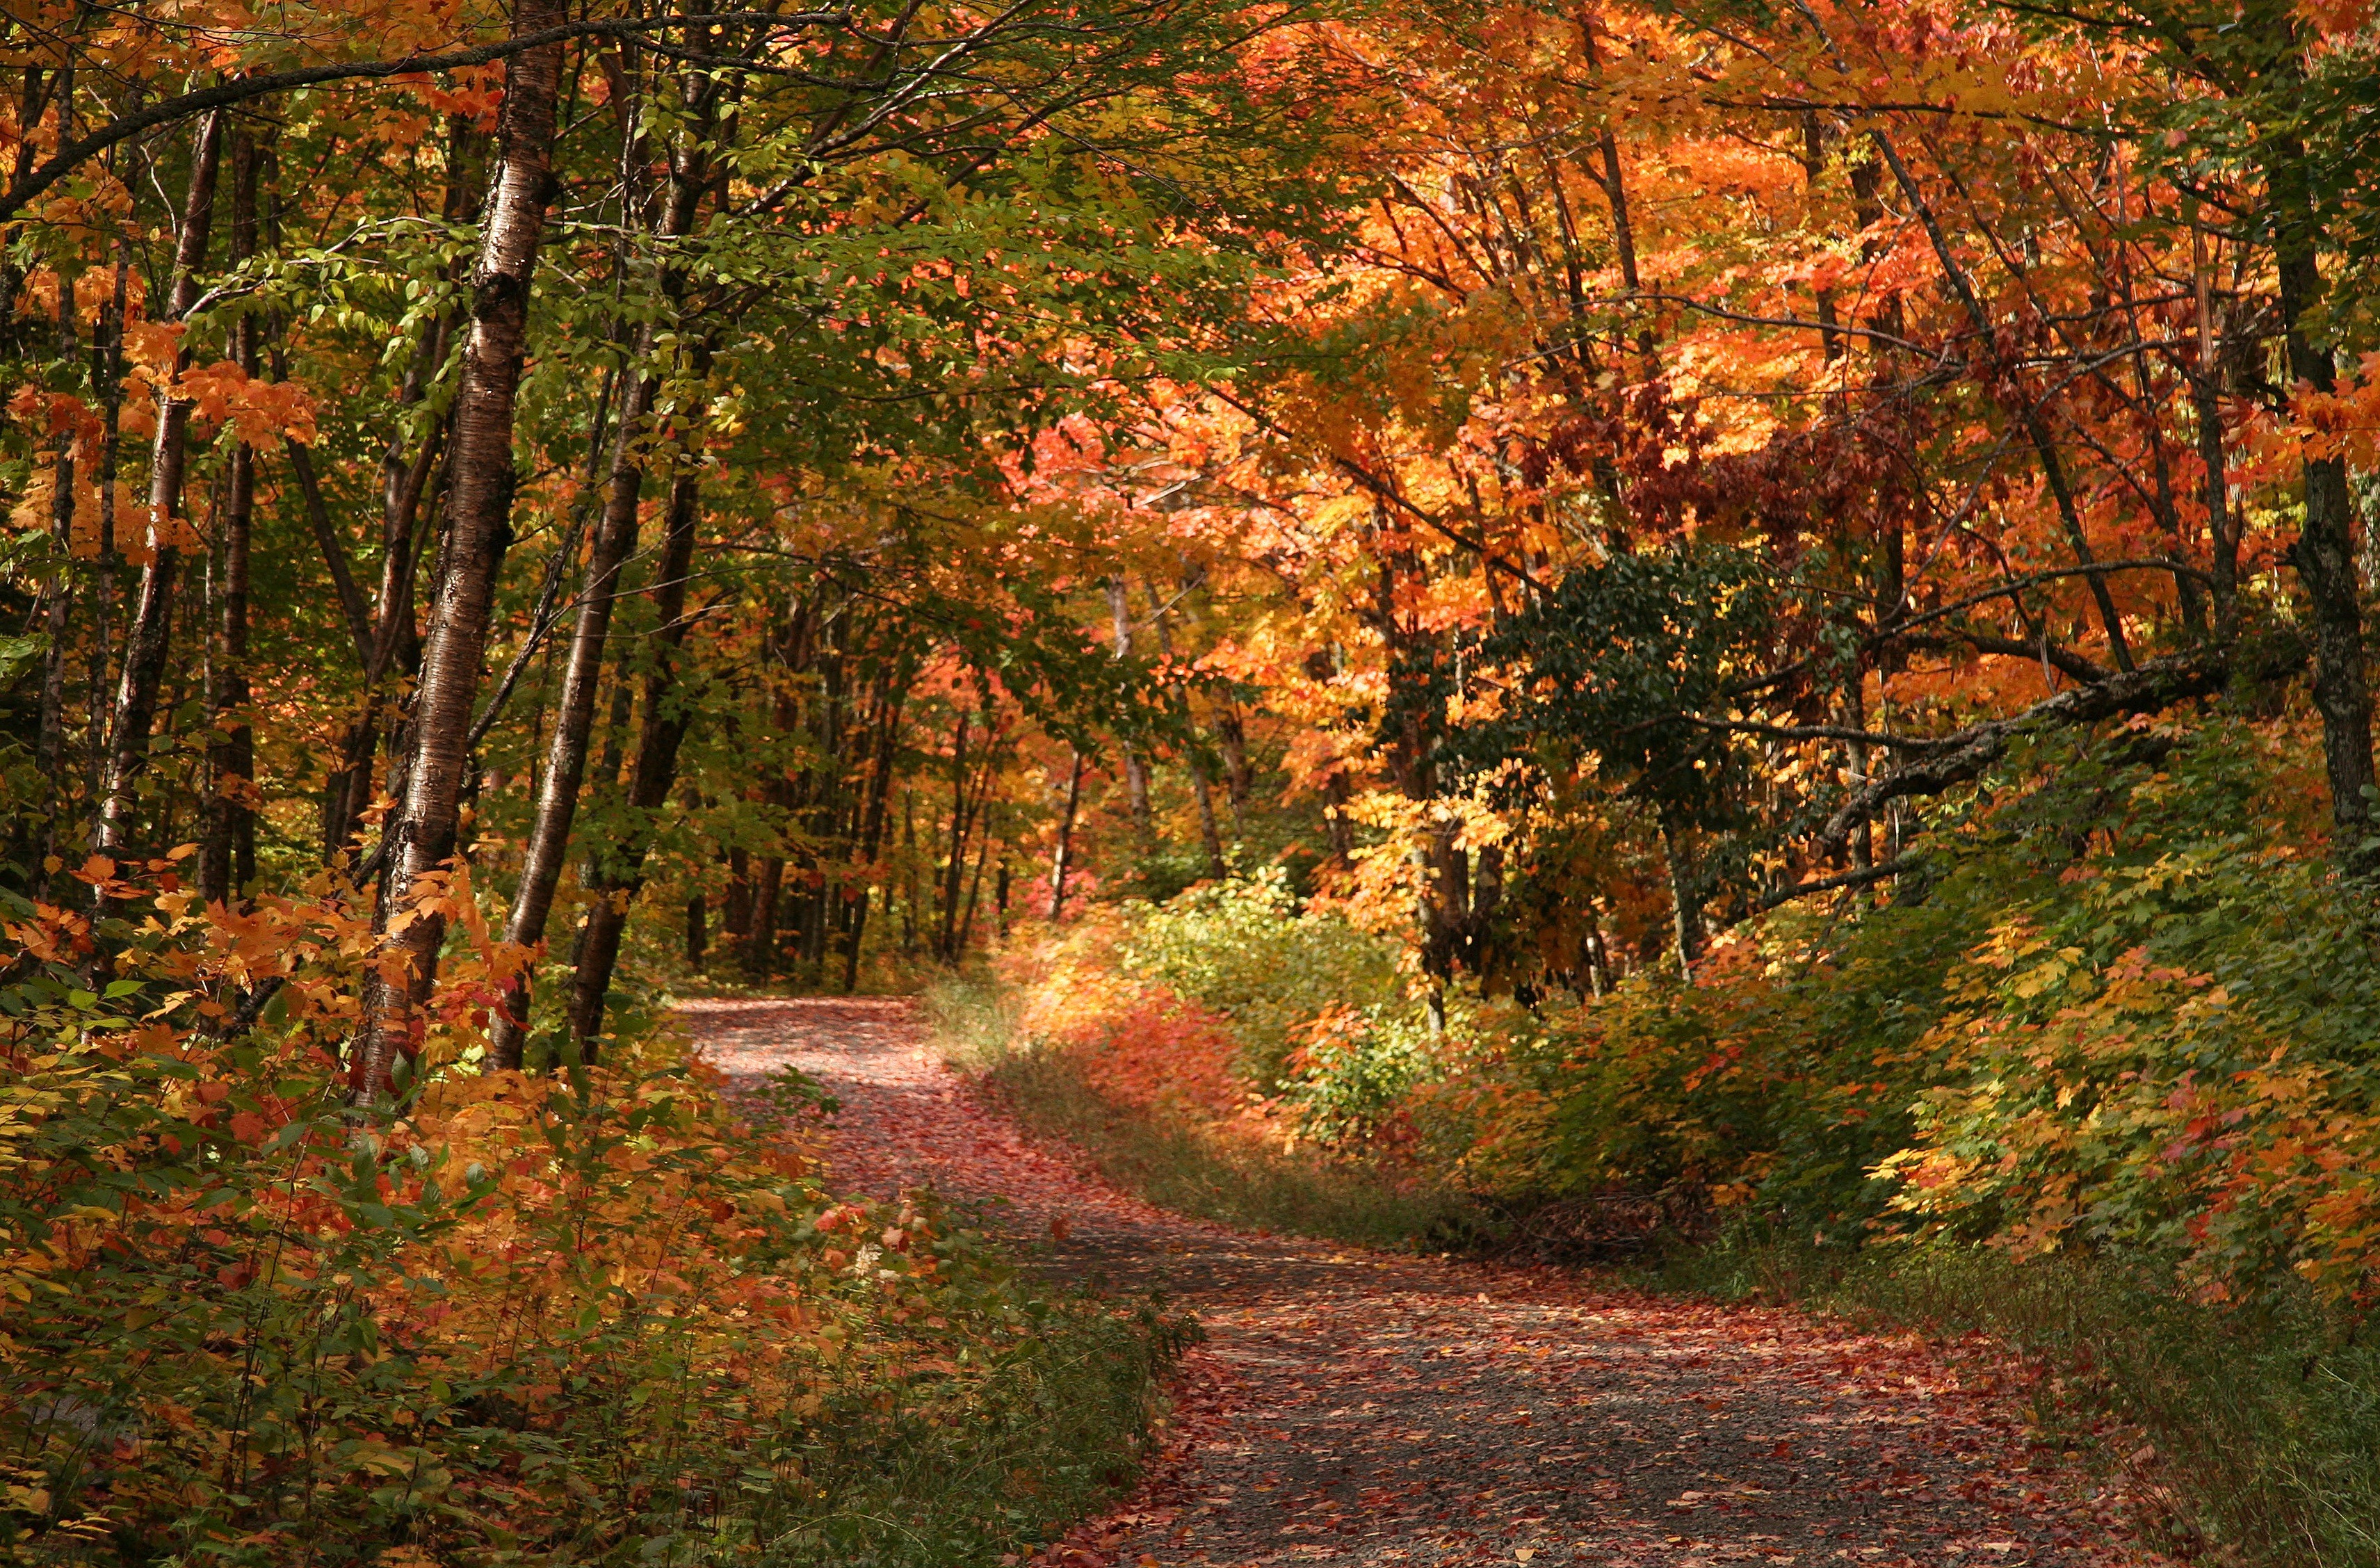 General 3423x2255 forest fall trees nature path outdoors